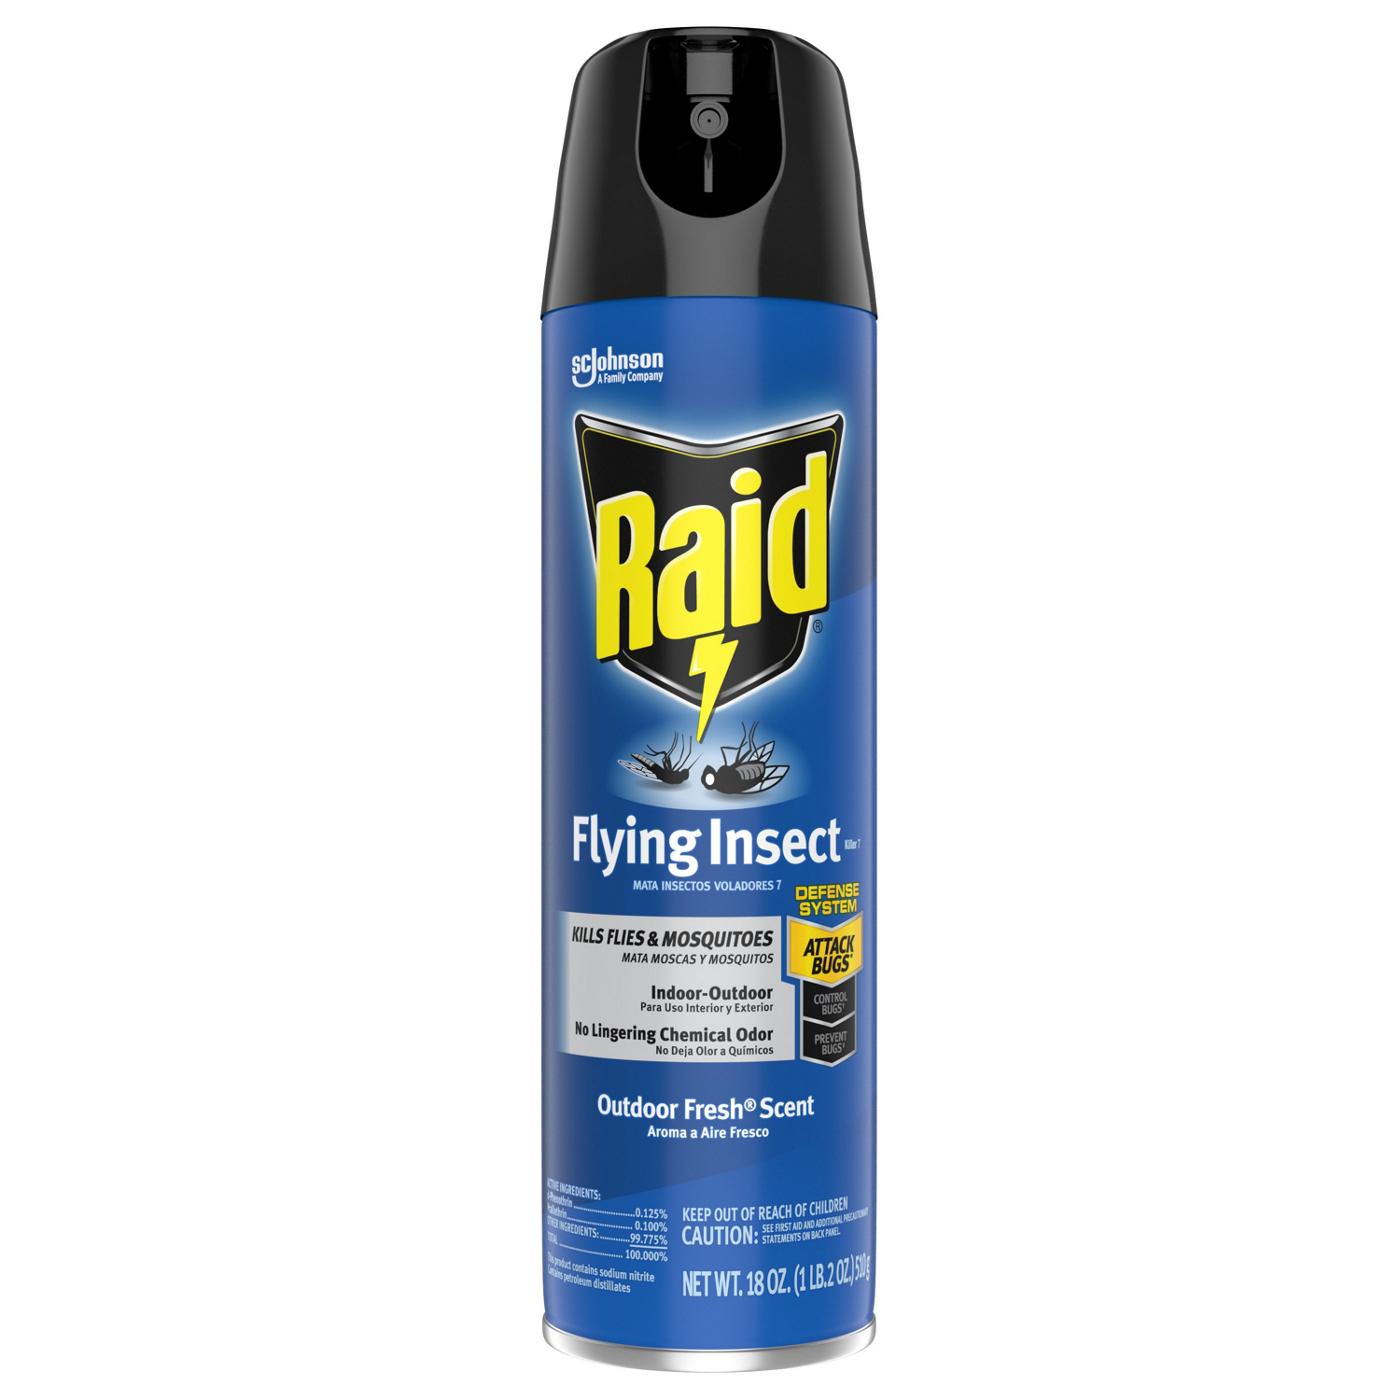 Raid Flying Insect Killer 7; image 1 of 2